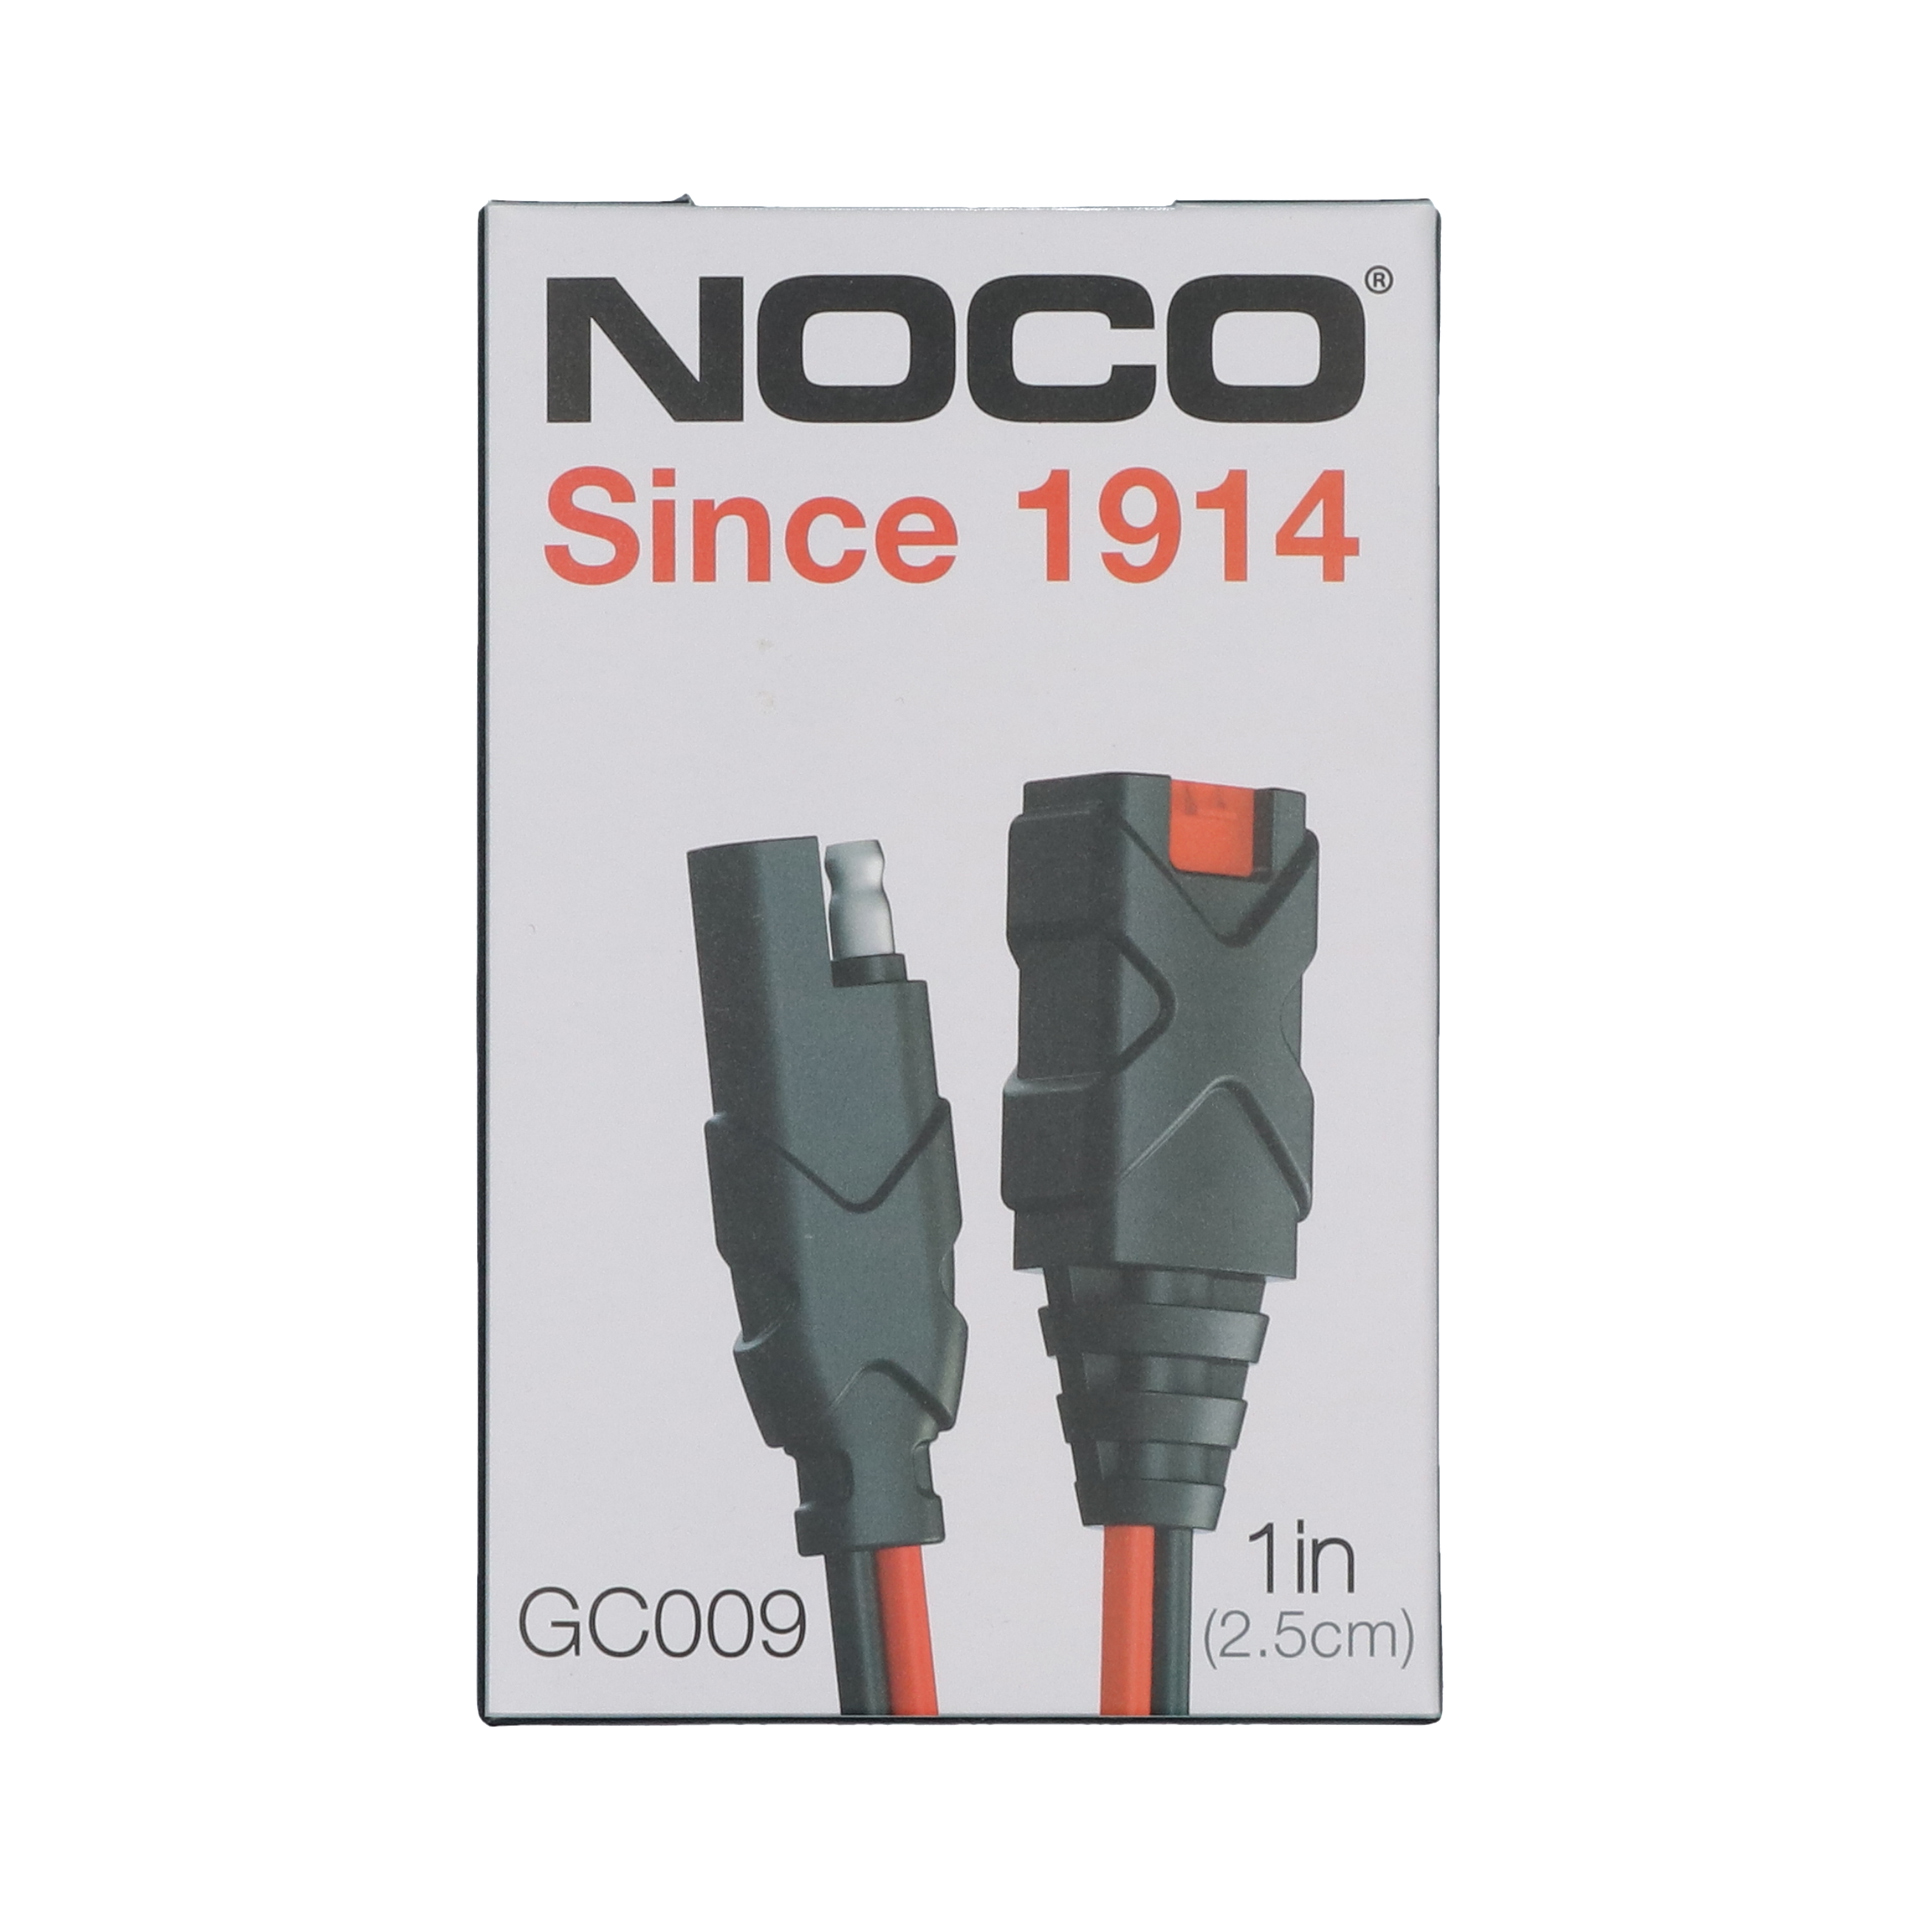 Noco X-Connect SAE Adapter GC009 (0636021)